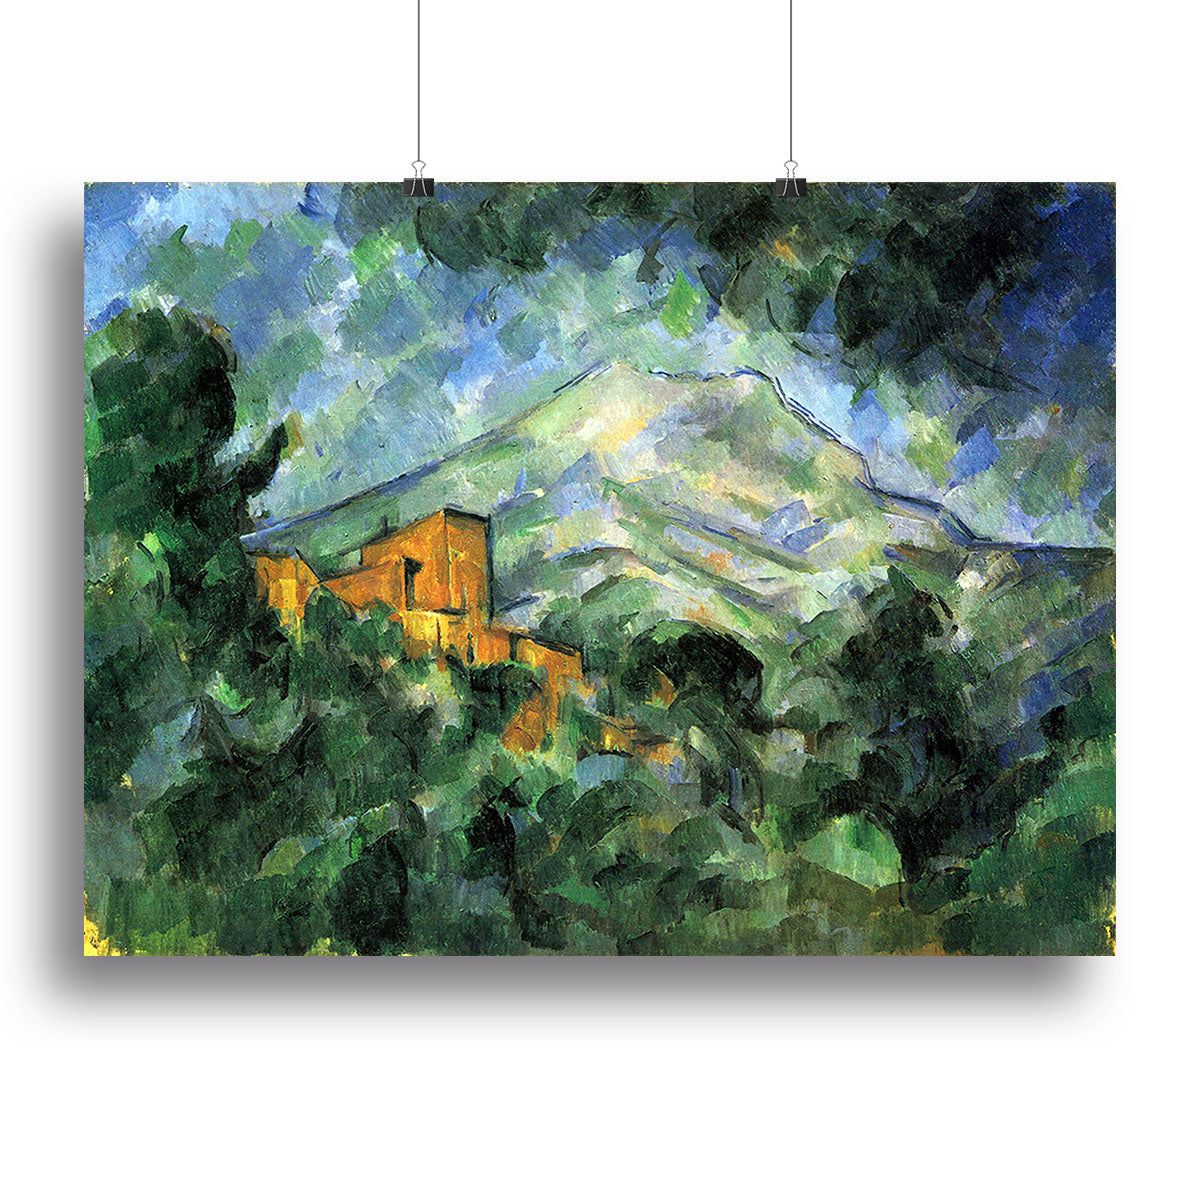 St. Victoire and Chateau Noir by Cezanne Canvas Print or Poster - Canvas Art Rocks - 2